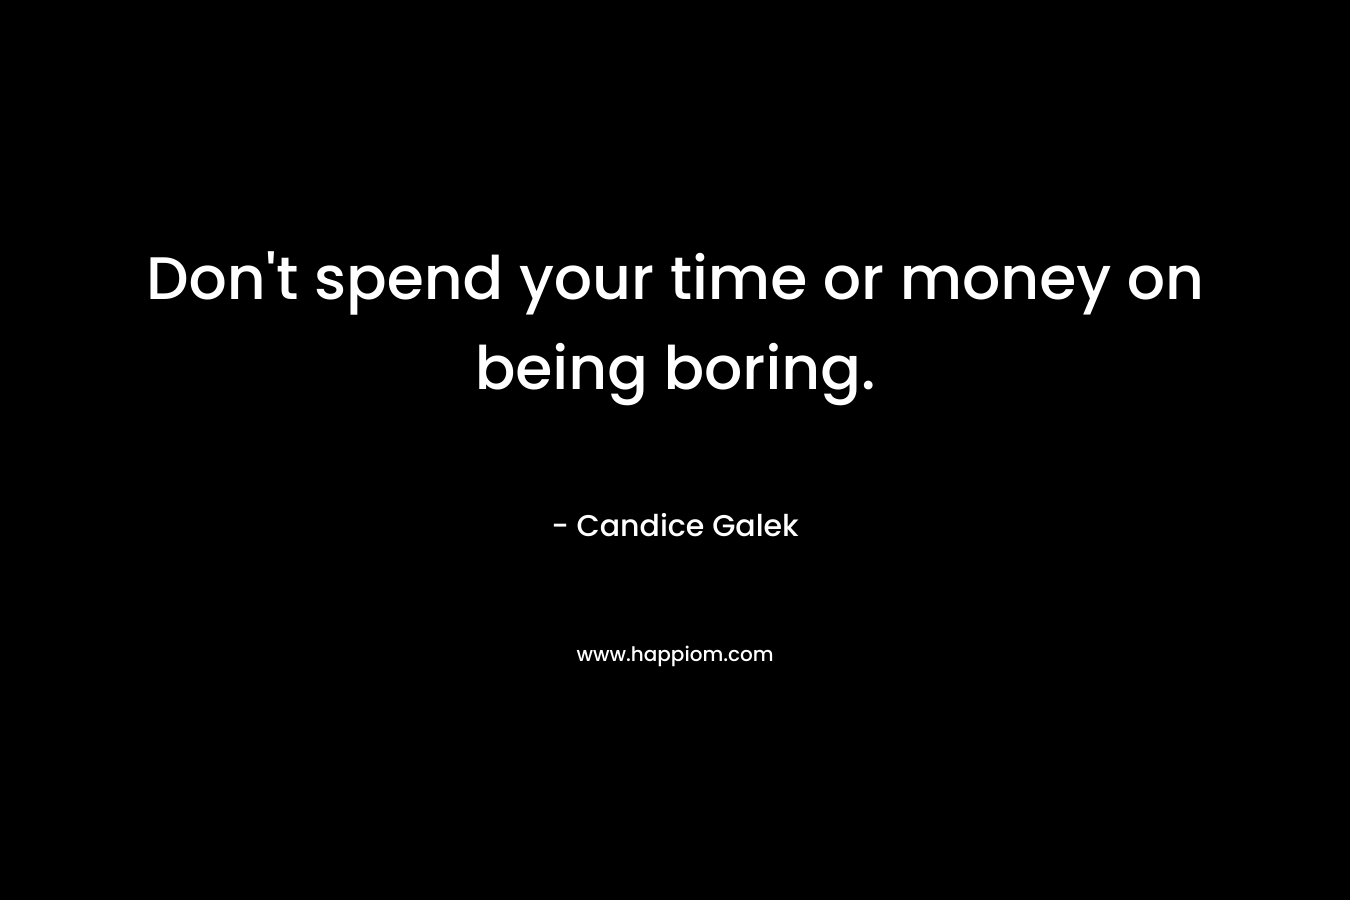 Don't spend your time or money on being boring.